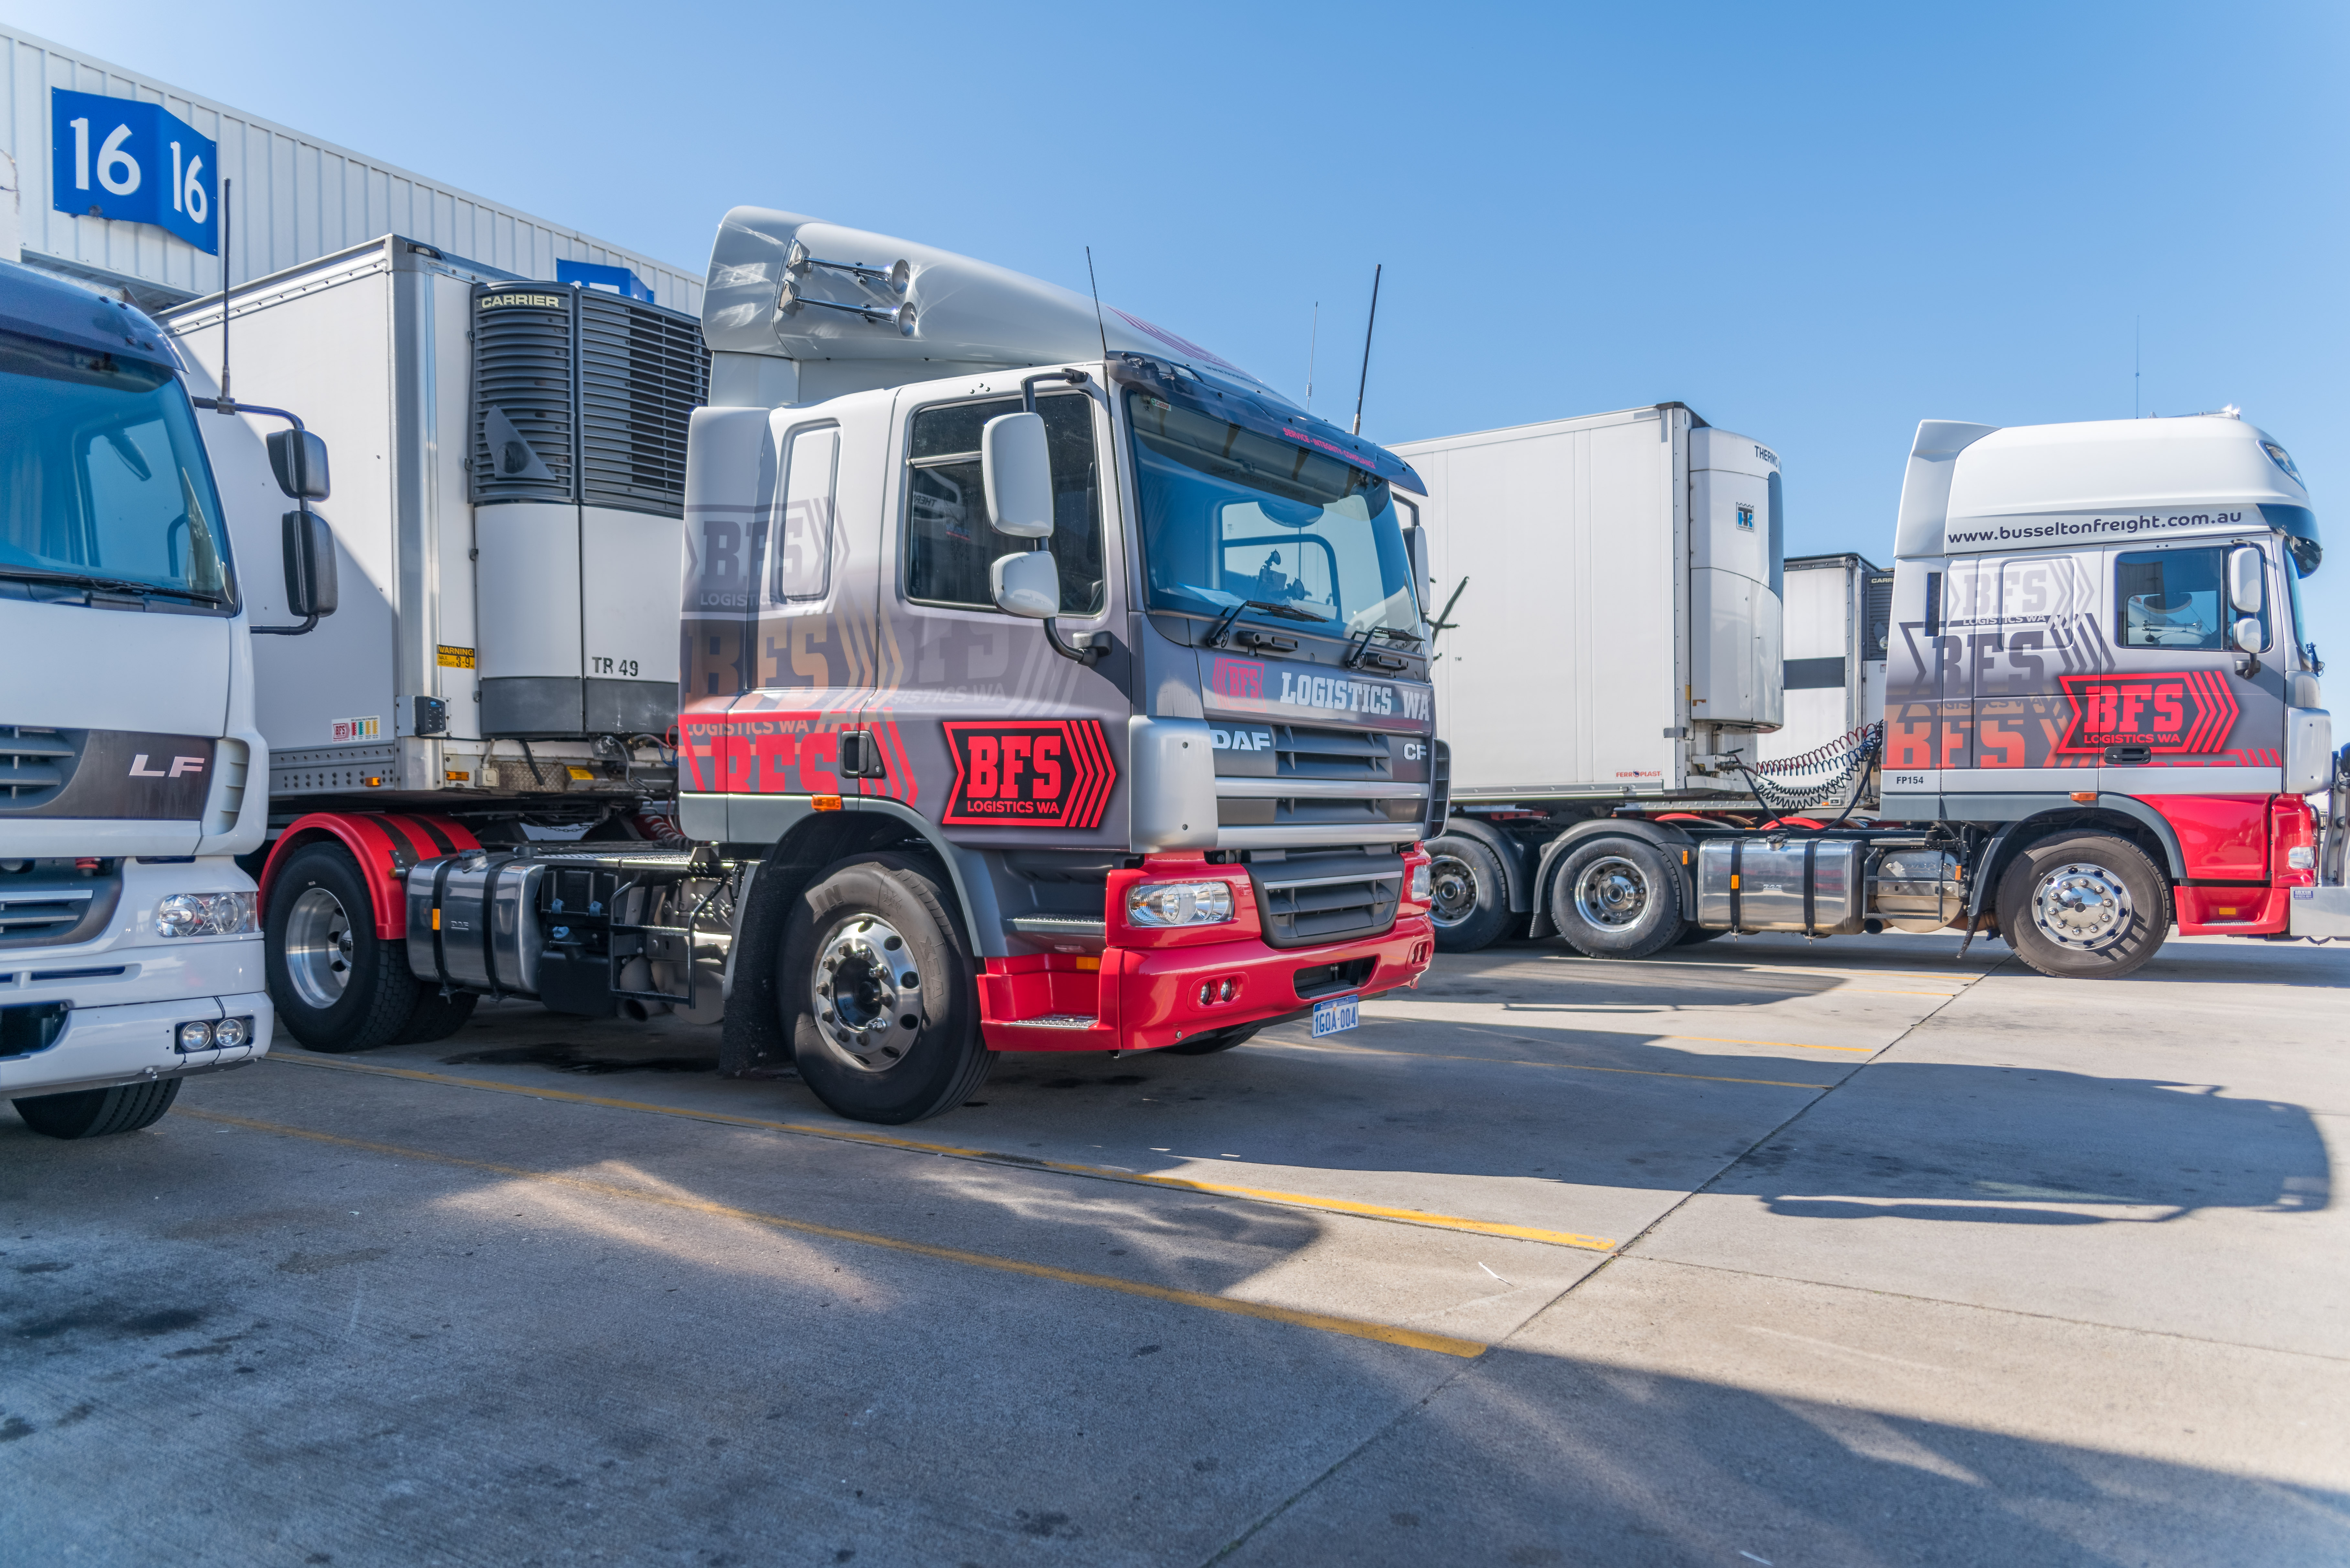 Busselton Freight Services